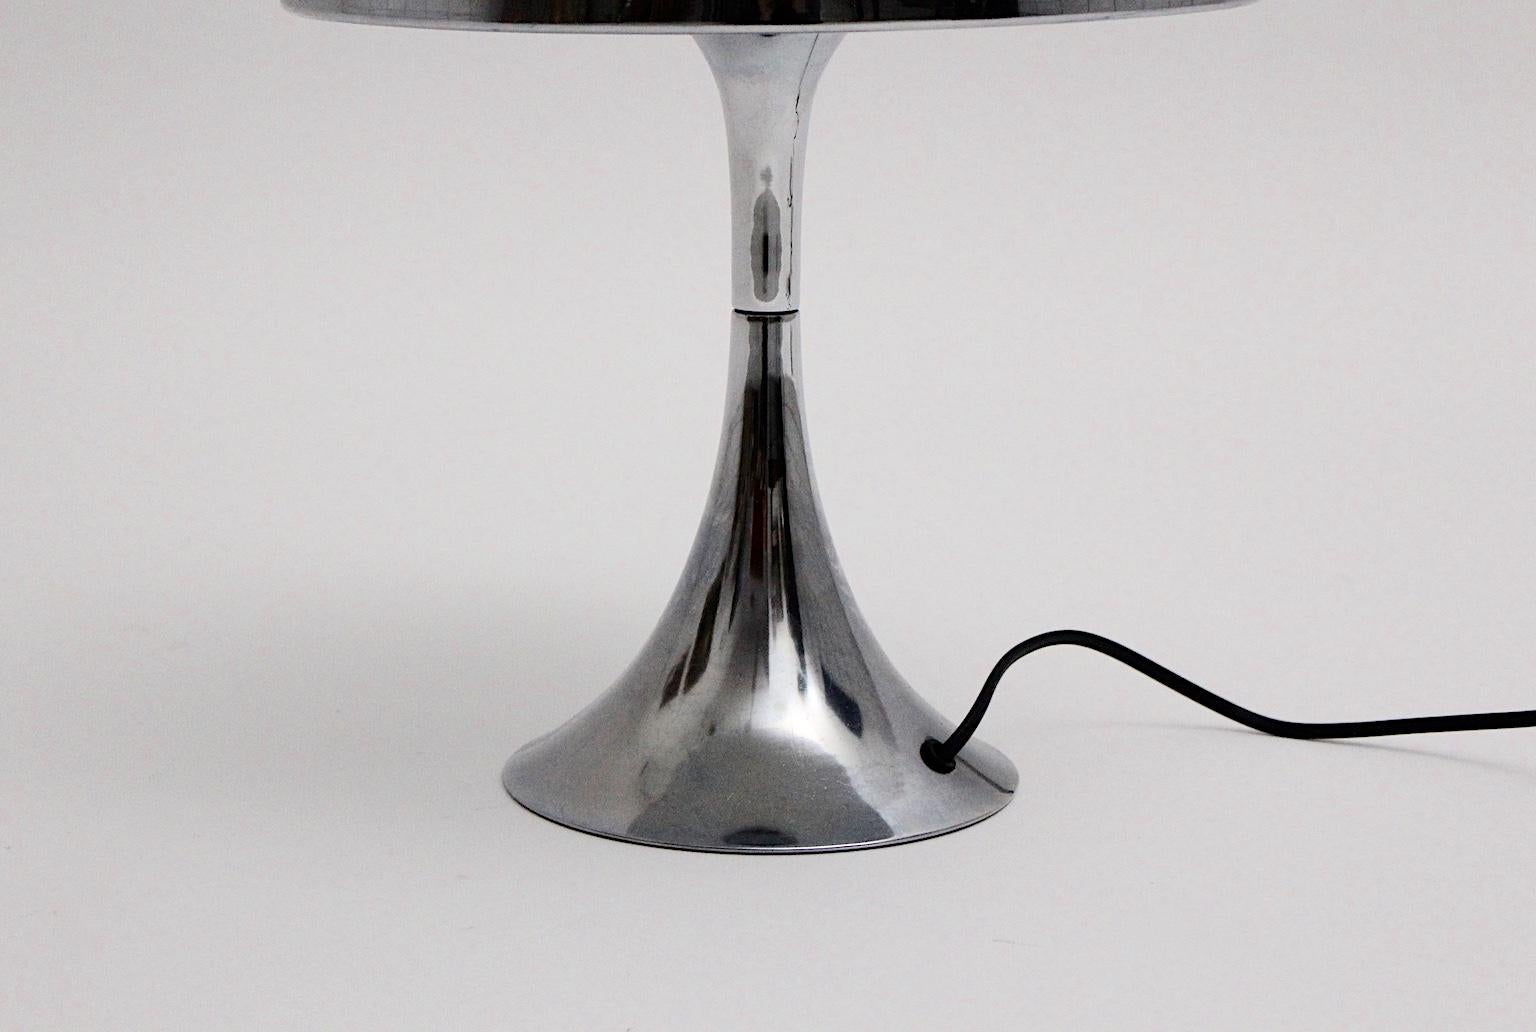 Space Age Vintage Metal Trumpet Table Lamp the Style of Goffedo Reggiani In Good Condition For Sale In Vienna, AT